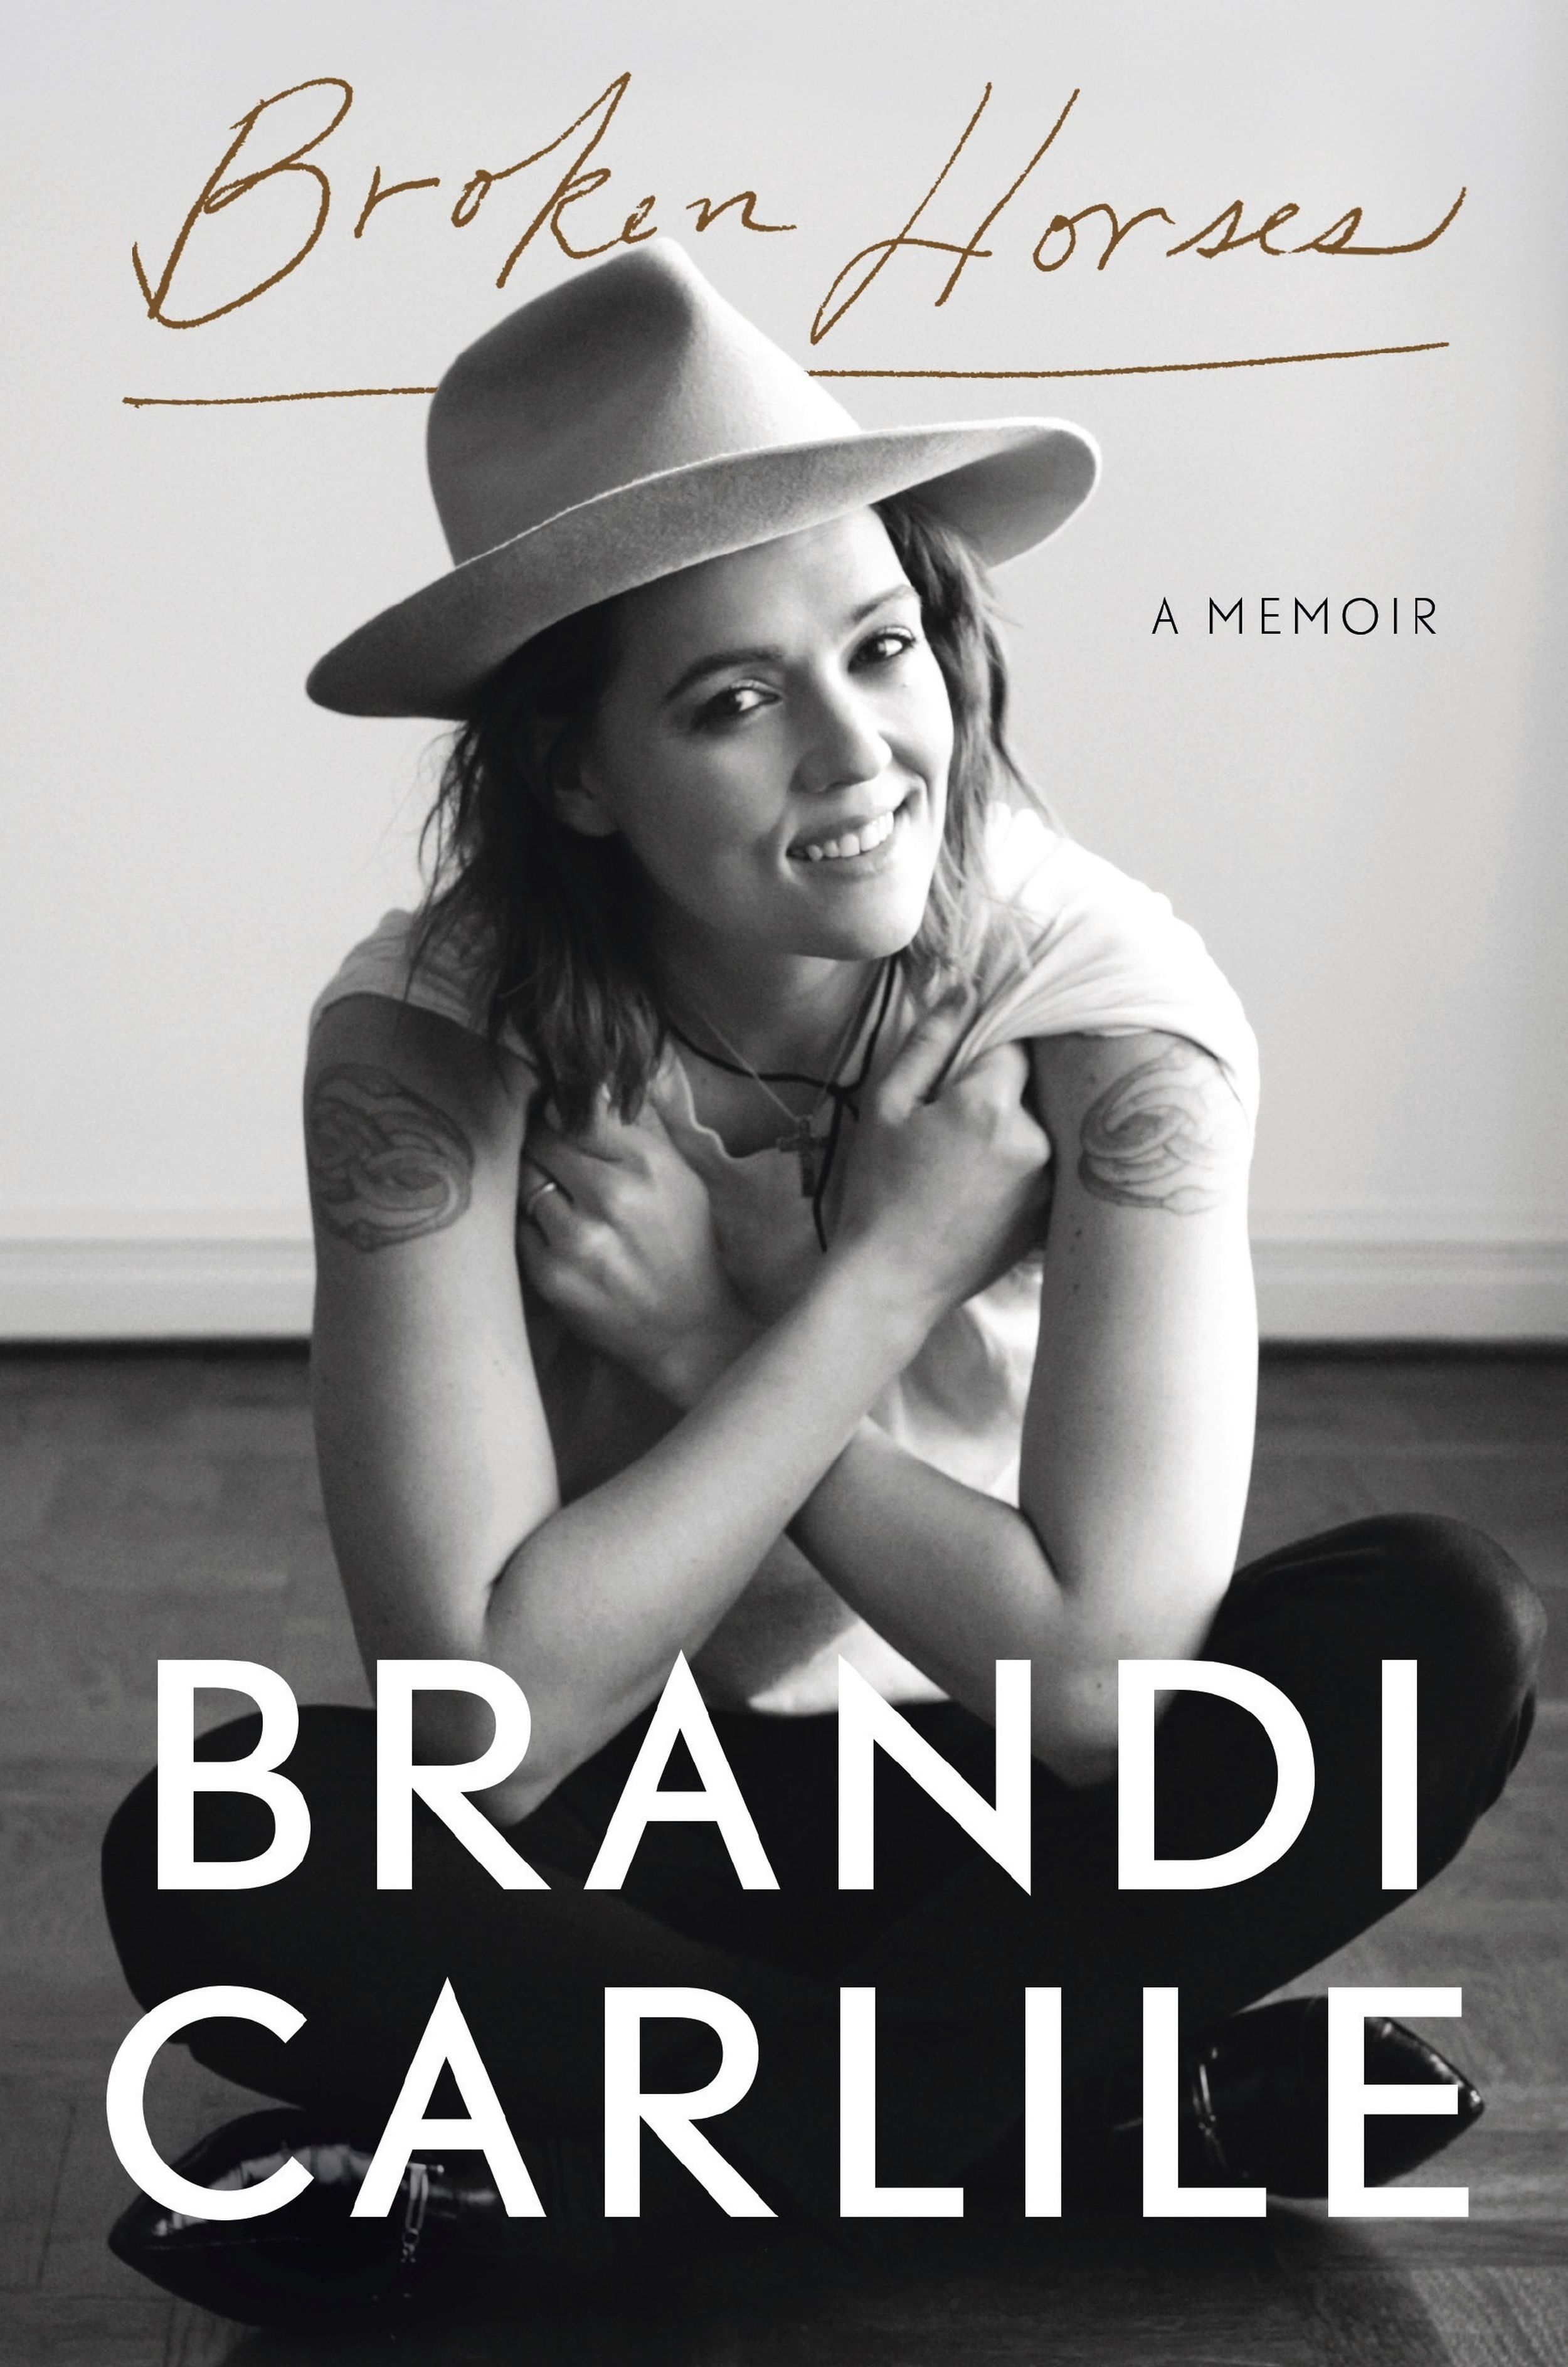 Brandi Carlile Opens Up About Overcoming Insecurities Her Latest Grammy Win And Her New Memoir The Spokesman Review